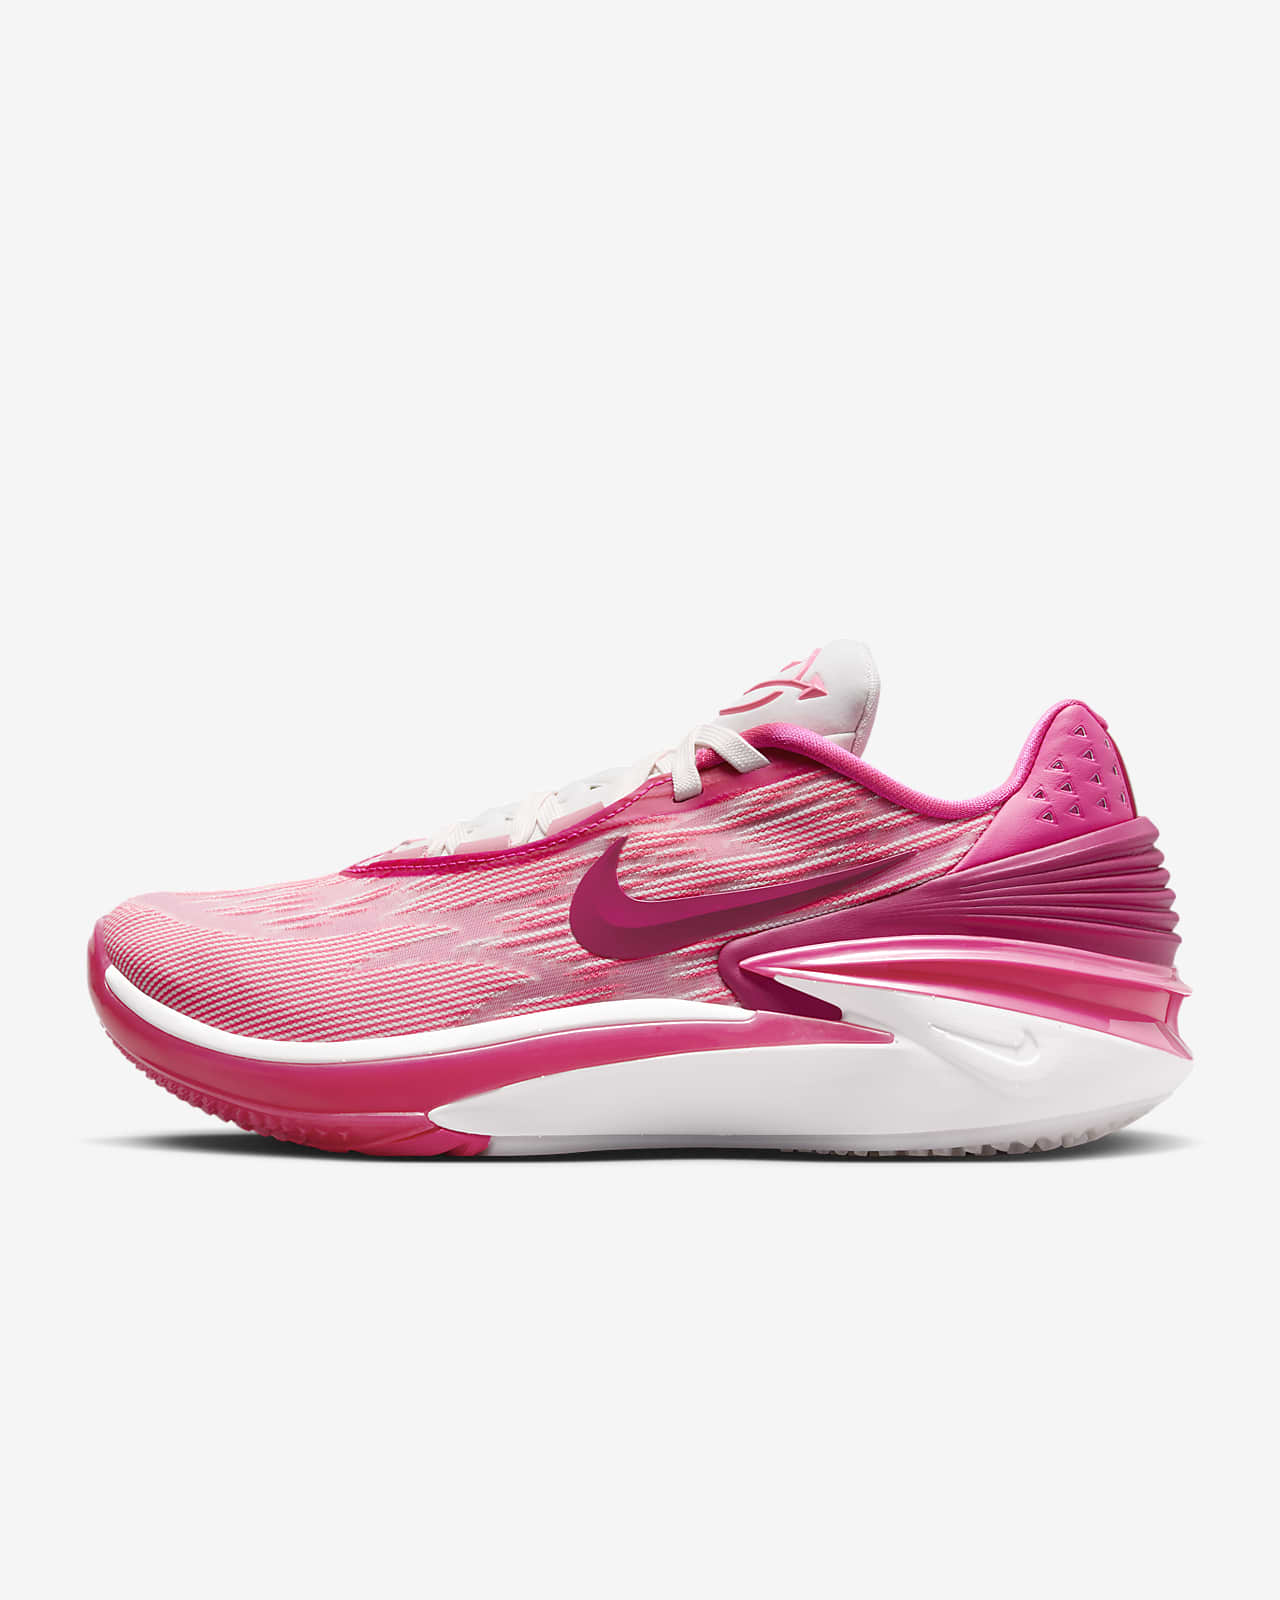 Assorted Nike basketball shoes for sale in the NBA store in